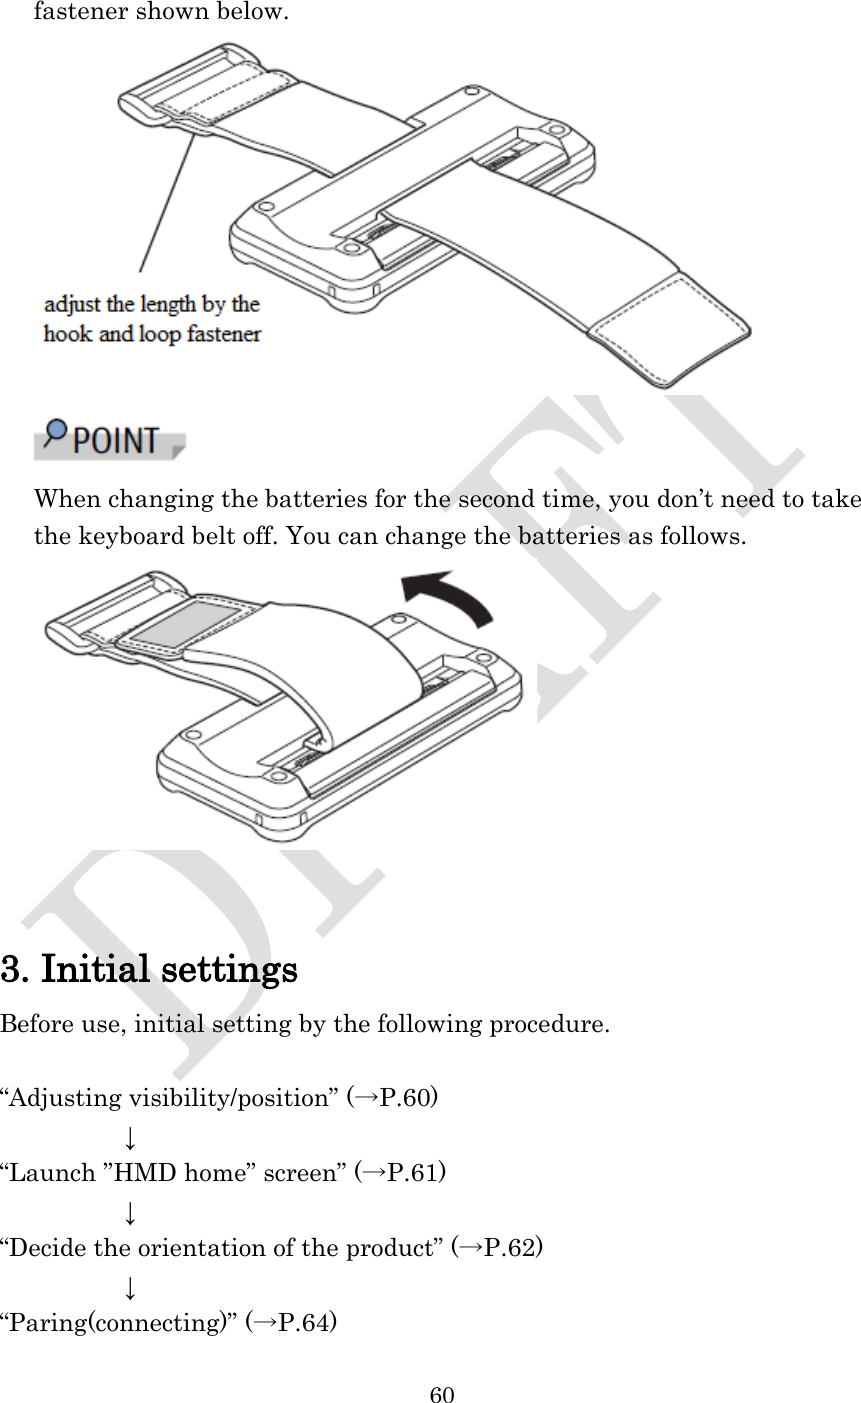  60  fastener shown below.   When changing the batteries for the second time, you don’t need to take the keyboard belt off. You can change the batteries as follows.    3. Initial settings Before use, initial setting by the following procedure.  “Adjusting visibility/position” (→P.60)      ↓ “Launch ”HMD home” screen” (→P.61)      ↓ “Decide the orientation of the product” (→P.62)      ↓ “Paring(connecting)” (→P.64) 